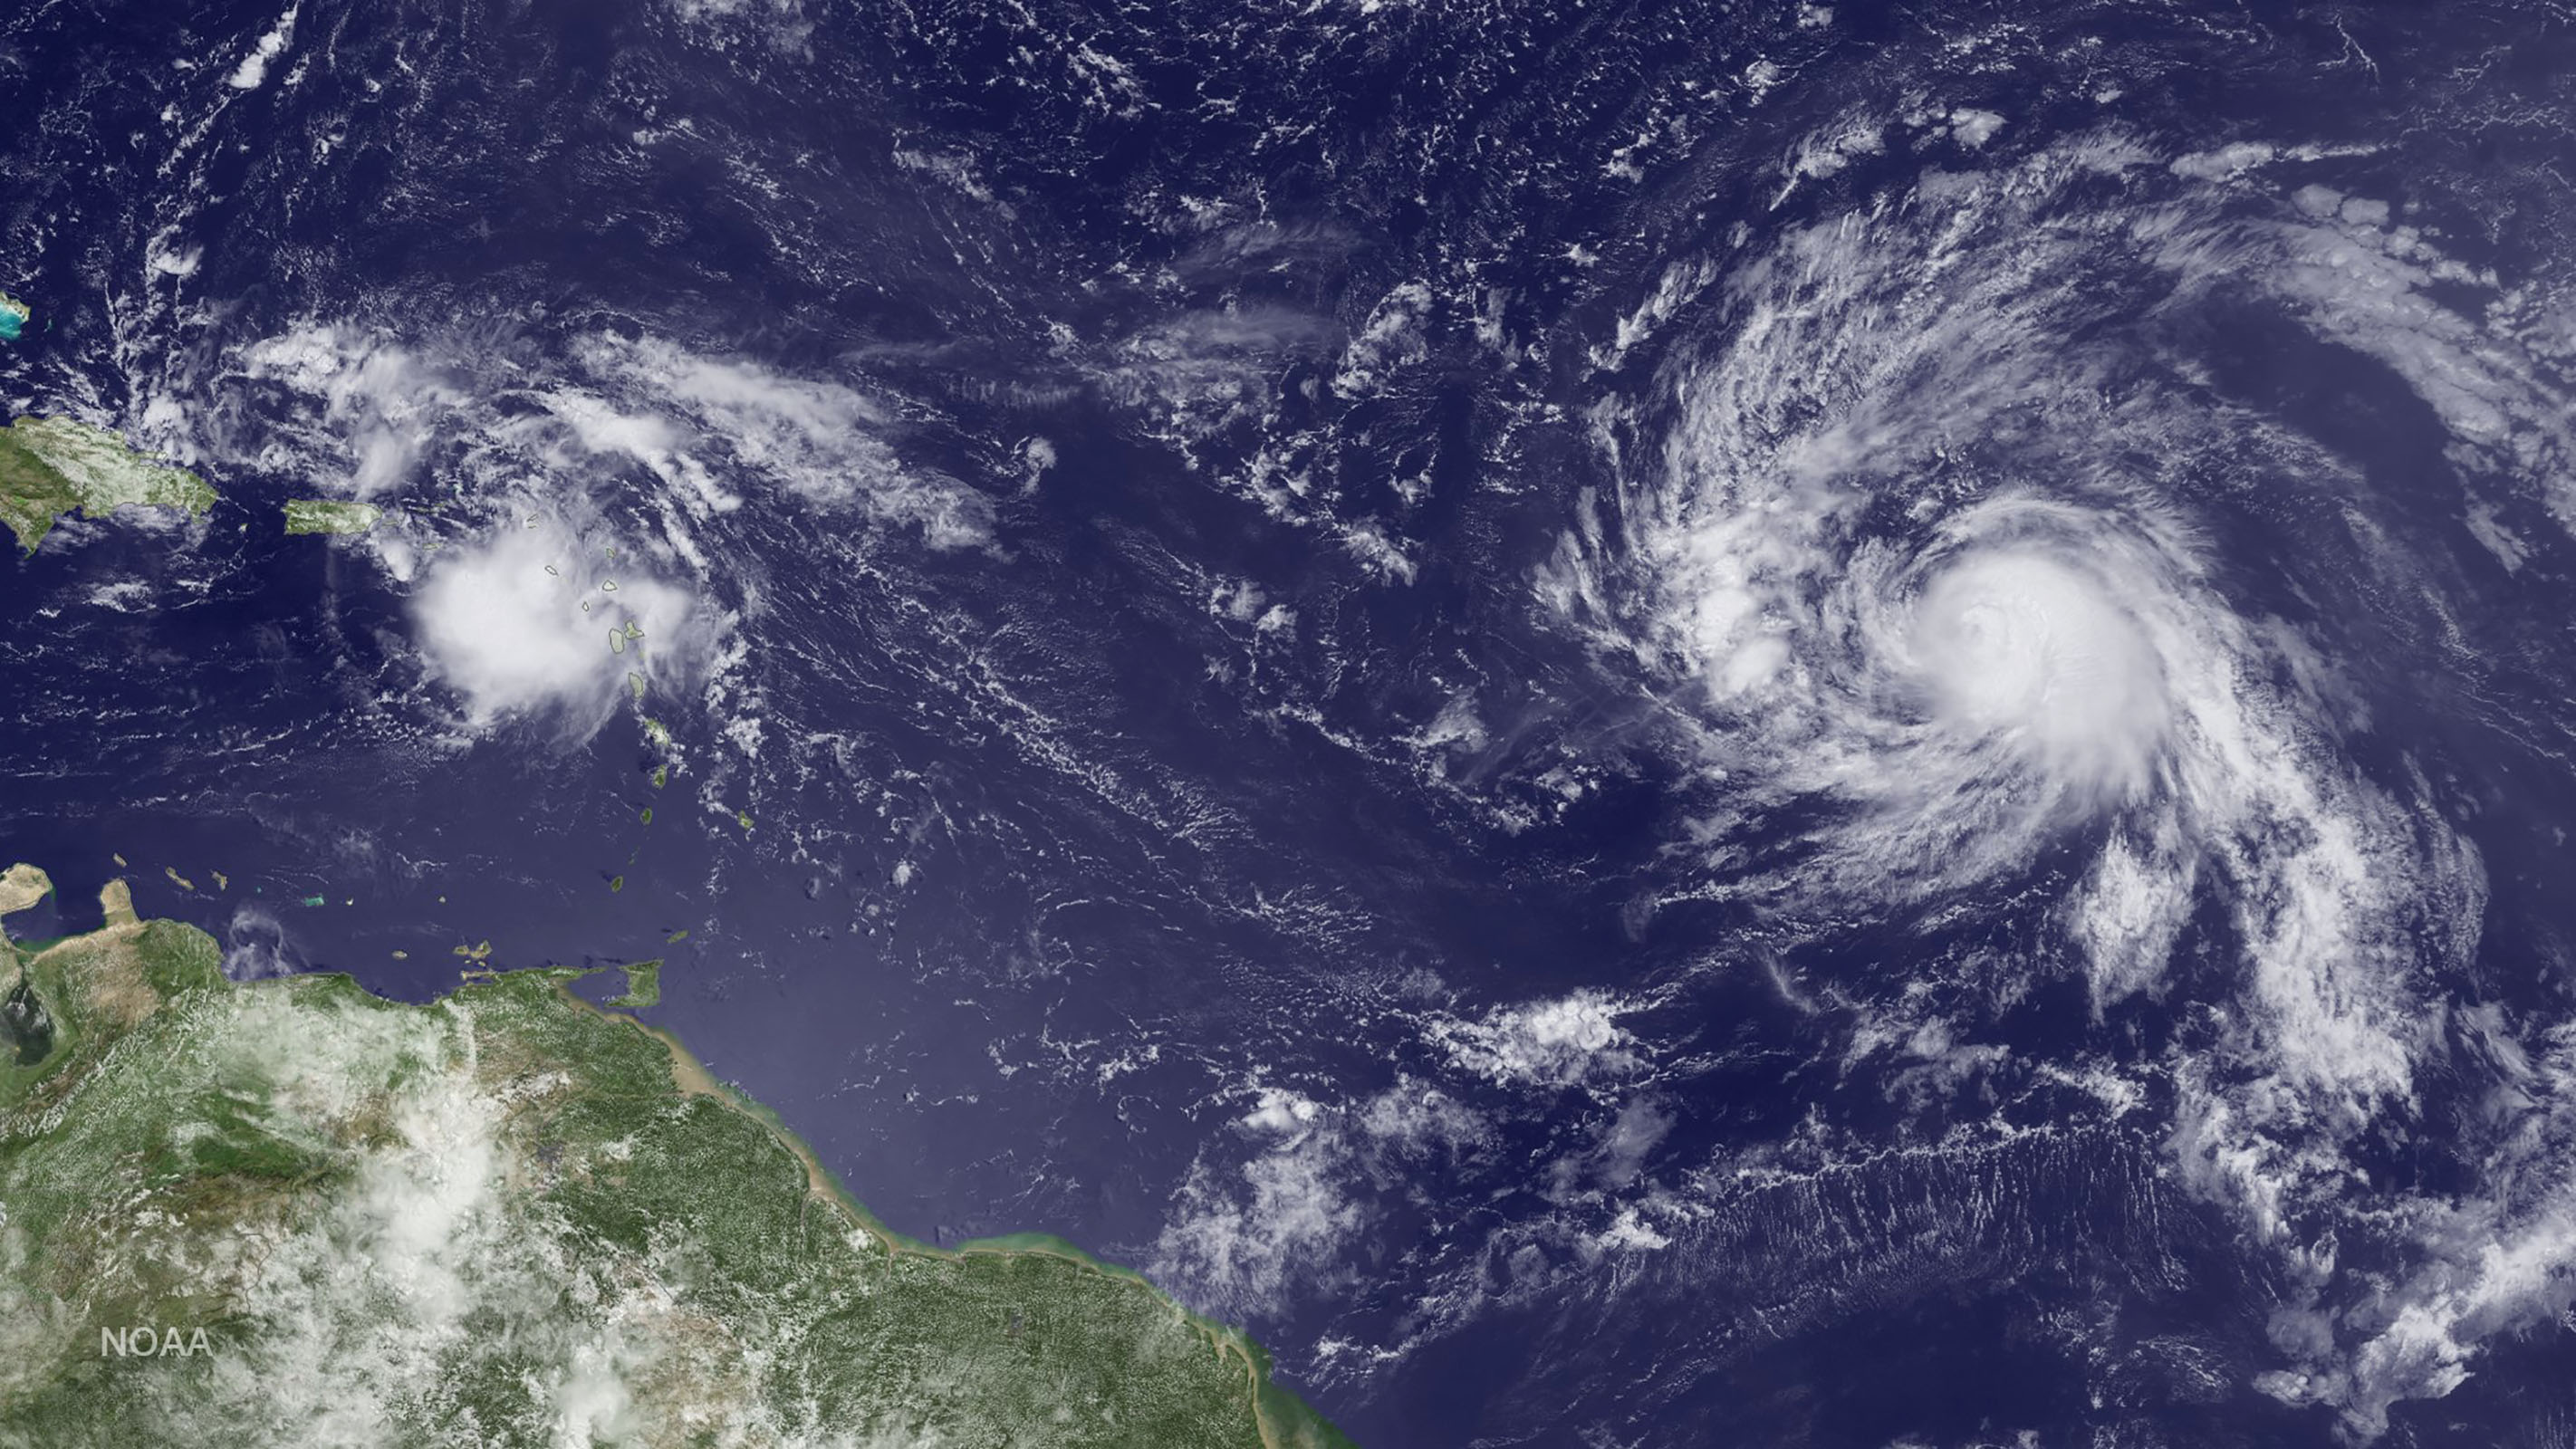 This NOAA image taken by GOES East on August 24, 2016, shows weather disturbance Invest 99L to the west near Puerto Rico and Tropical Storm Gaston to the east. According to NOAA's  National Hurricane Center, Tropical Storm Gaston could reach hurricane strength today, however the storm could move into environmental conditions that might weaken it temporarily. The current forecast shows the storm pushing through these conditions in roughly 72 hours and re-strengthening, perhaps significantly.  / AFP PHOTO / NOAA / HO / RESTRICTED TO EDITORIAL USE - MANDATORY CREDIT "AFP PHOTO / NOAA" - NO MARKETING NO ADVERTISING CAMPAIGNS - DISTRIBUTED AS A SERVICE TO CLIENTS